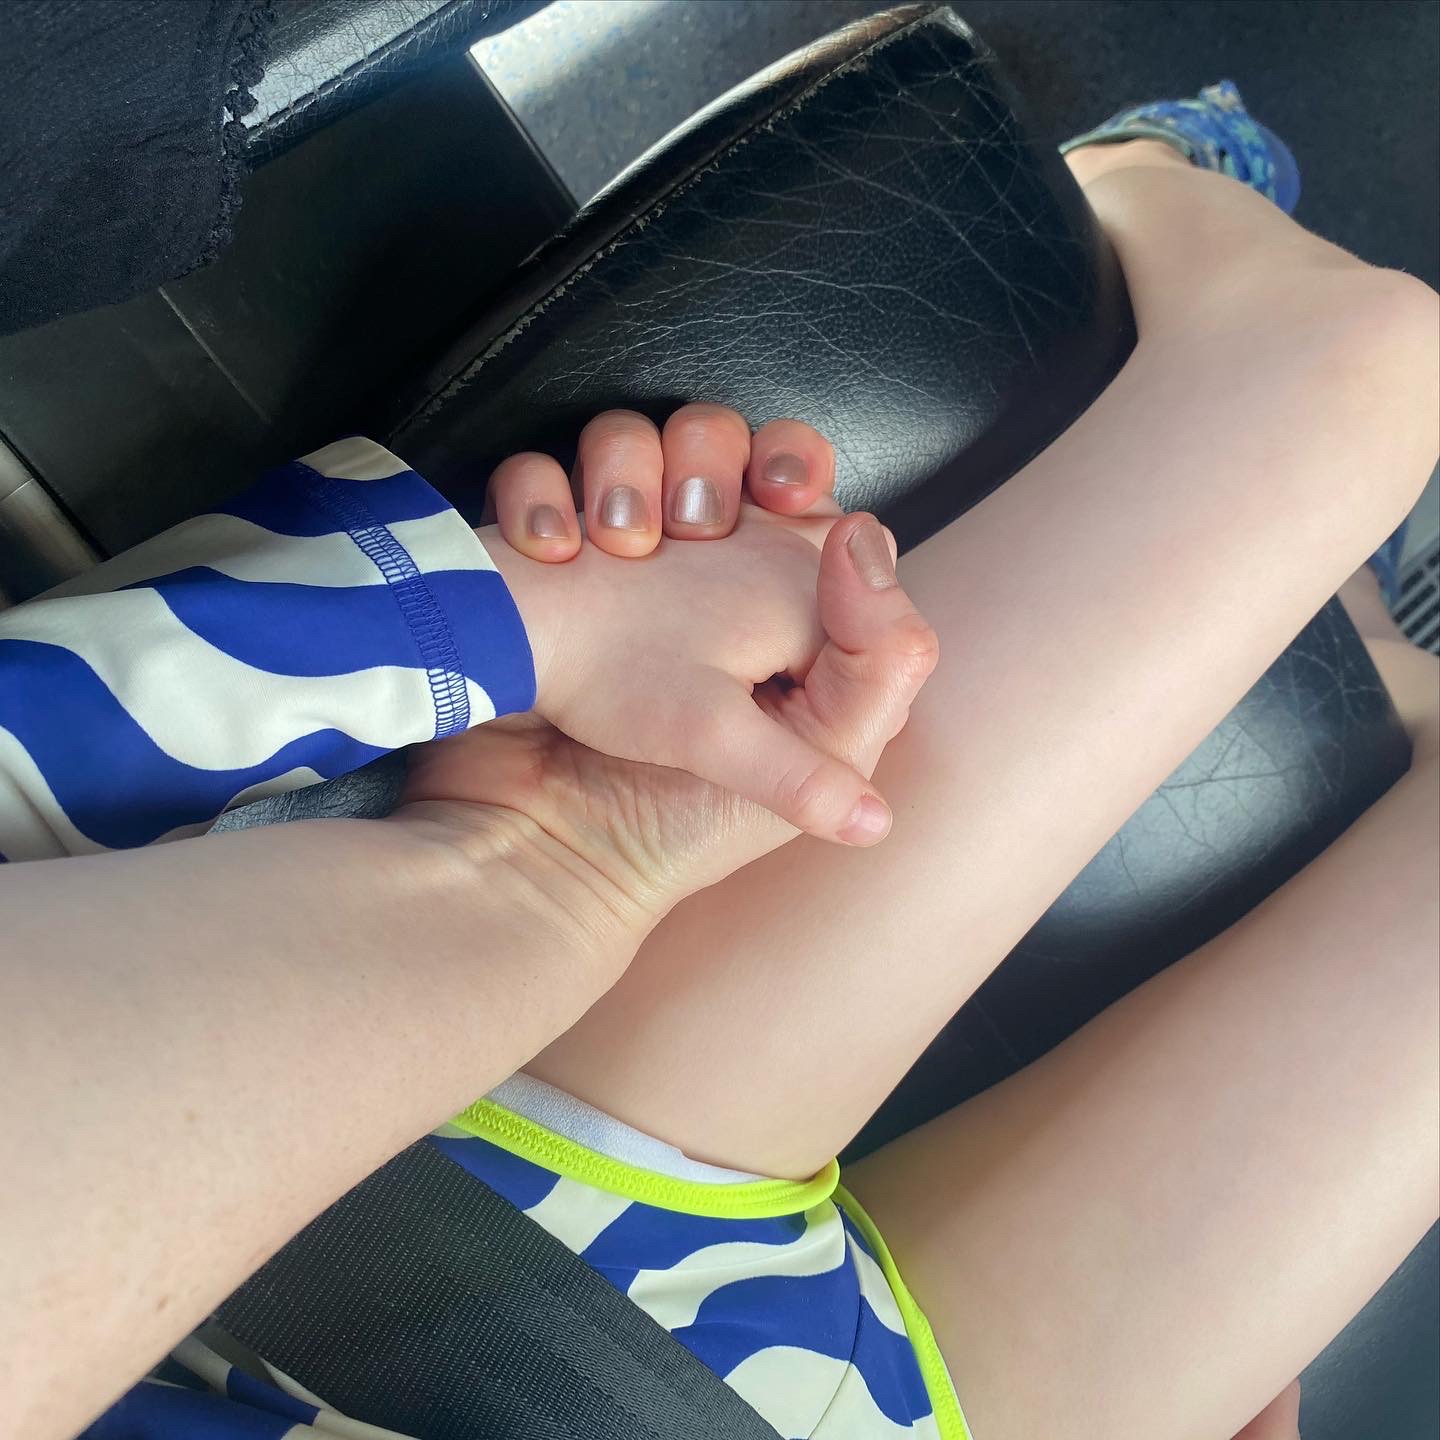 child holding mother's hand